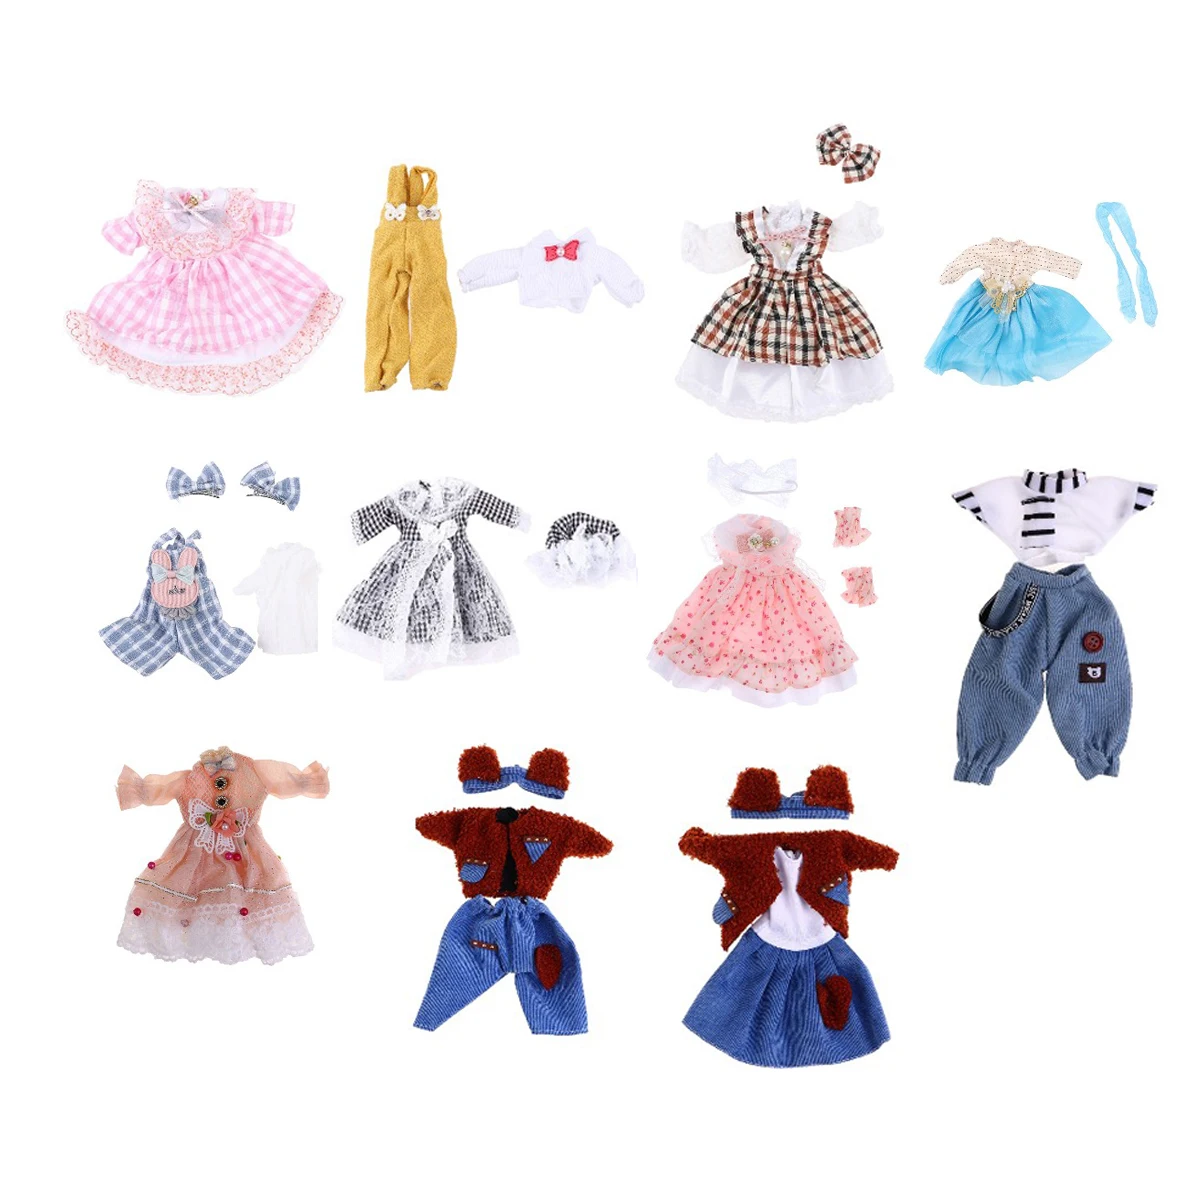 

Doll Clothes Dress Veil College Style Fit 18Inch American Doll Girls And 43Cm New Born Baby Item,Generation Baby Girl's Toy Gift